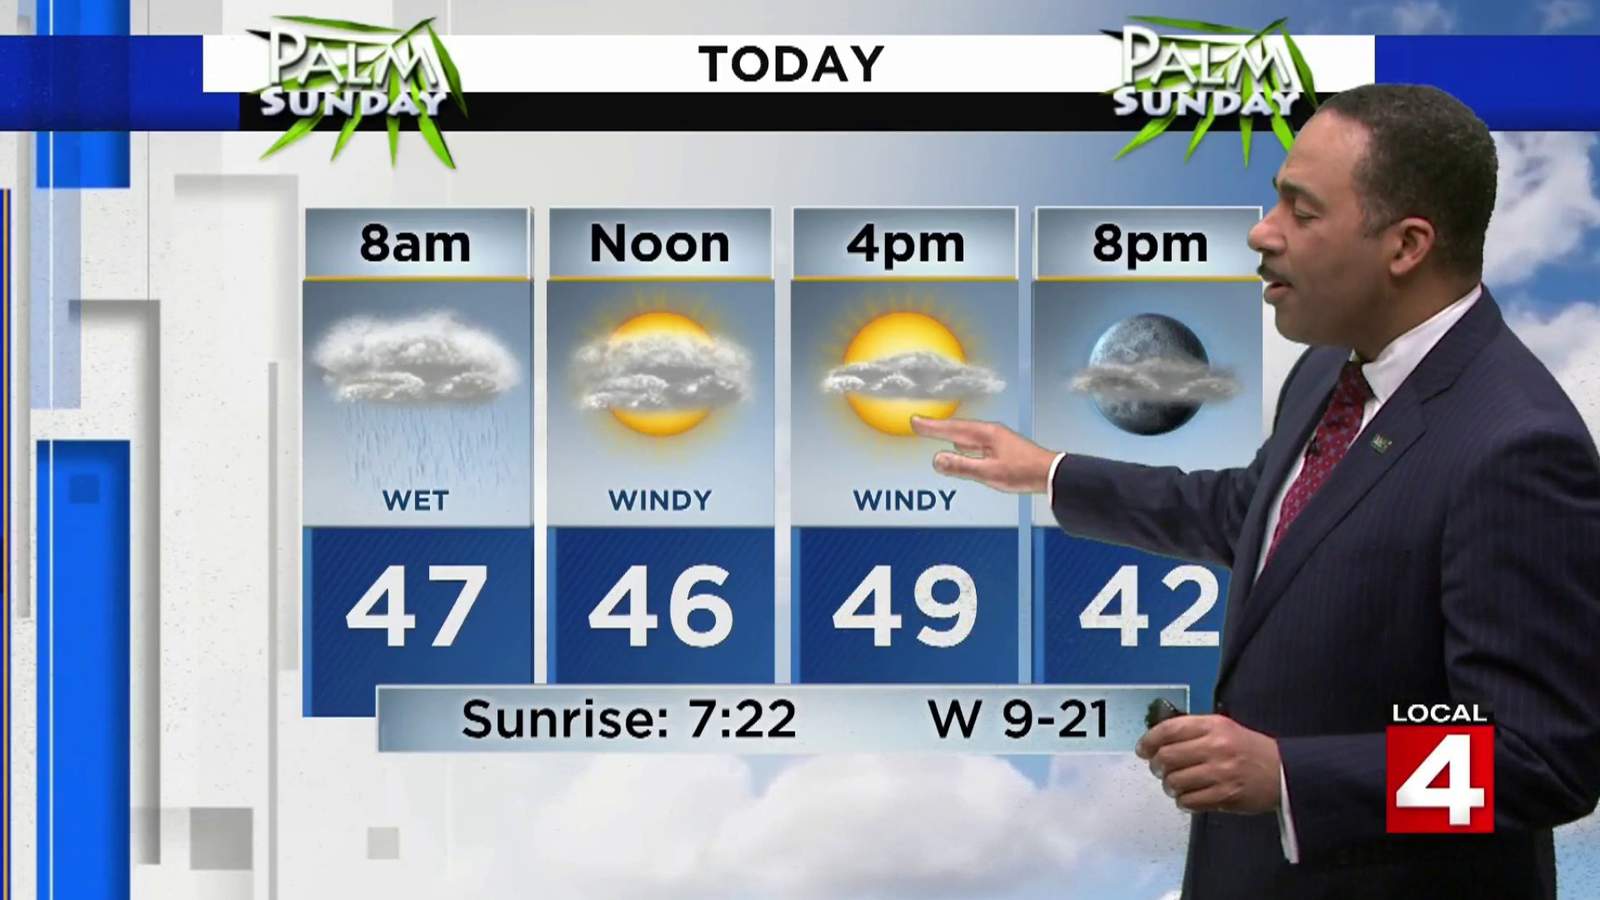 Metro Detroit weather: Windy conditions arrive Palm Sunday and remain chilly